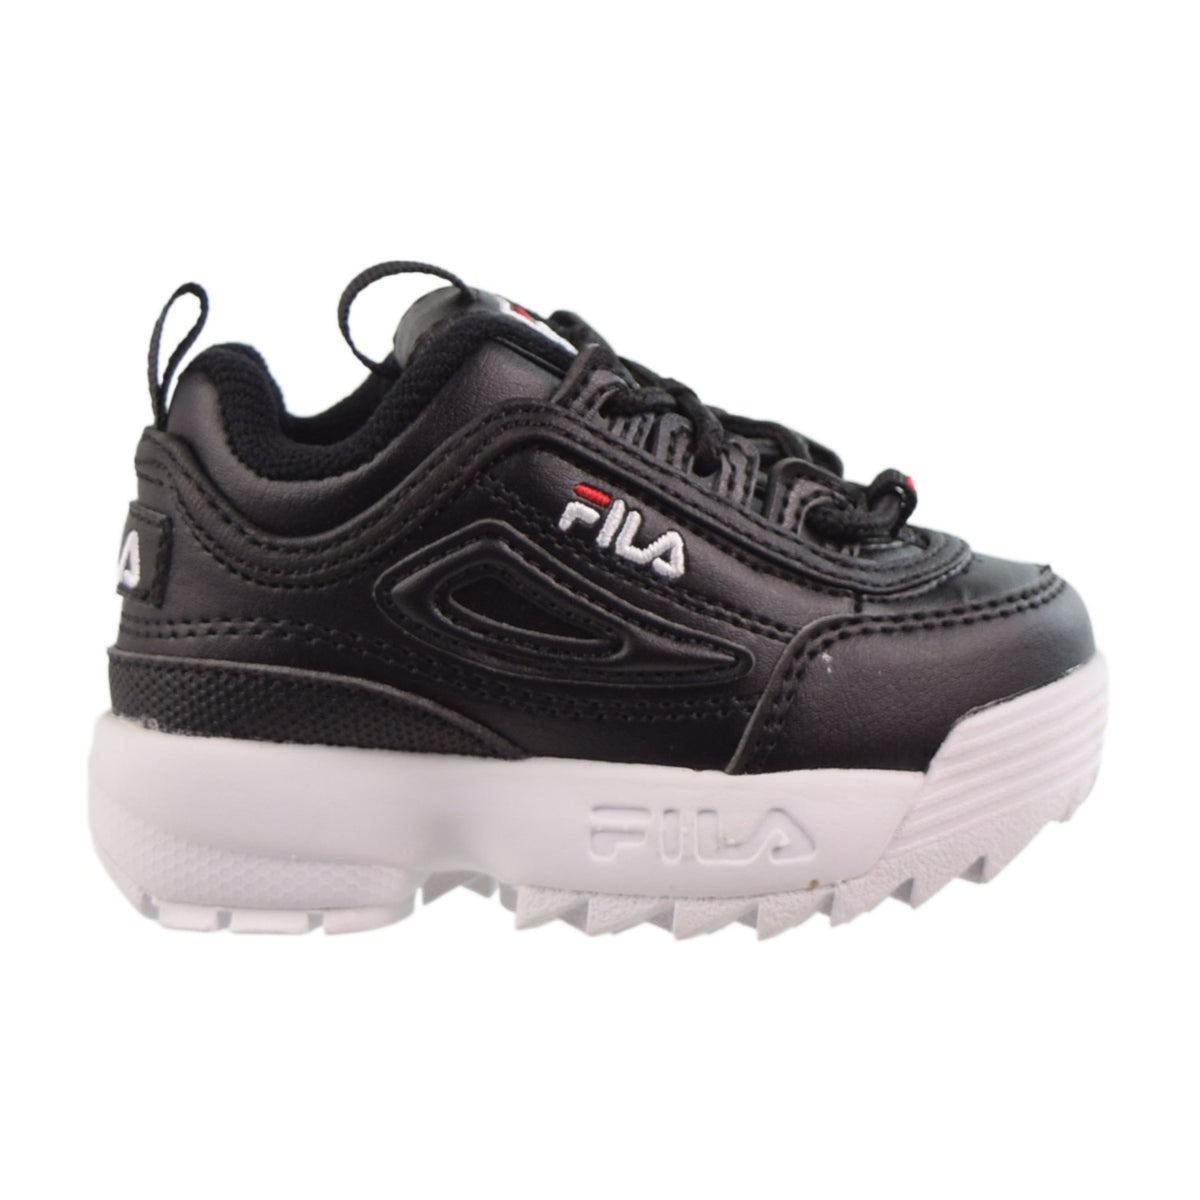 II Toddlers Shoes Black-White-Red